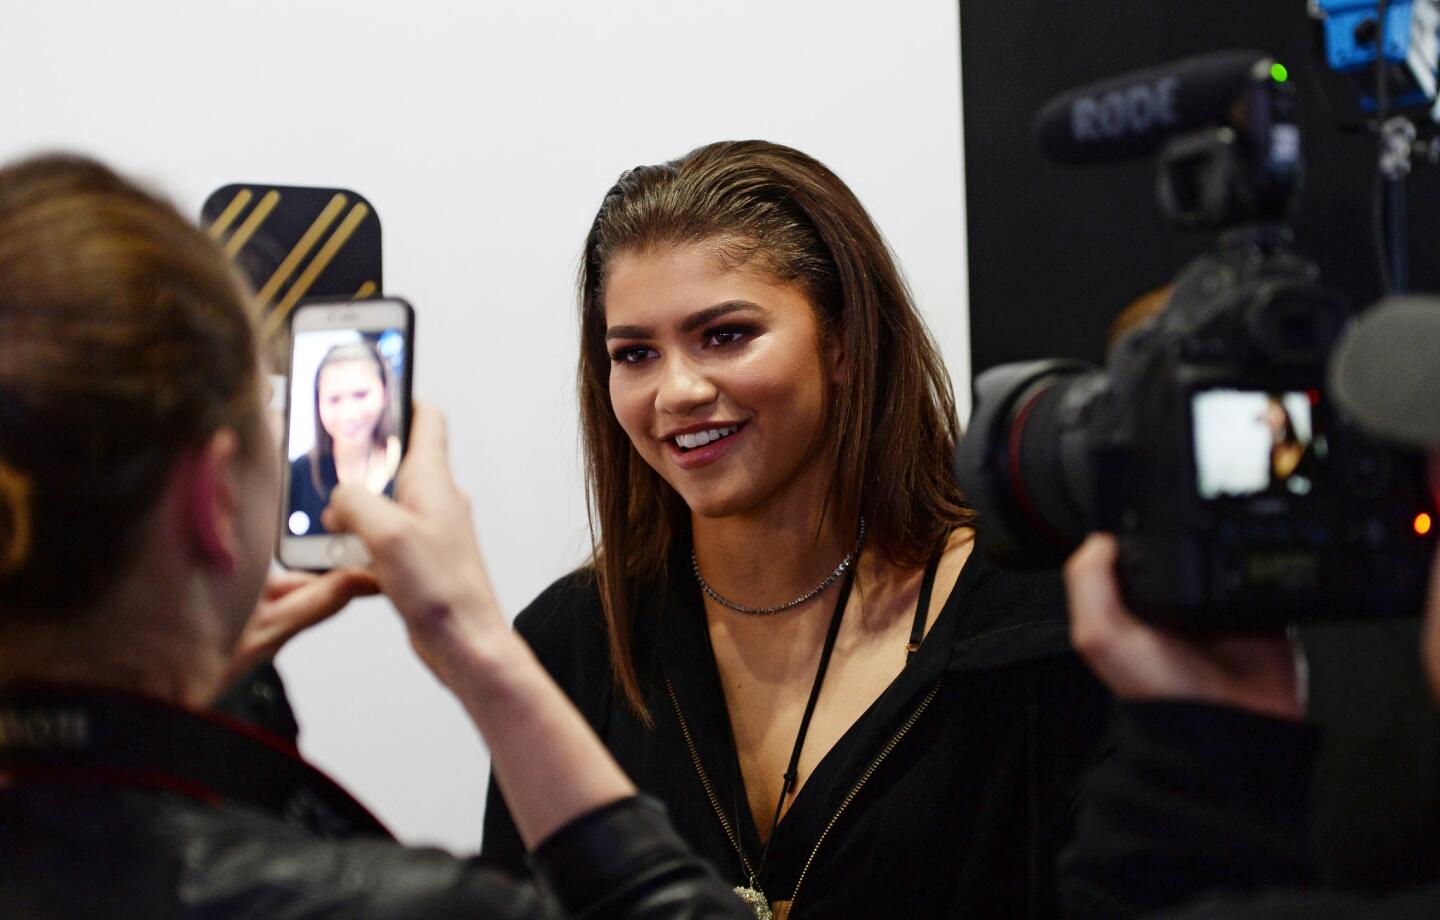 Actress and singer Zendaya arrives at the Daya by Zendaya Pop-up Shop at Known Gallery in Los Angeles on Nov. 5.